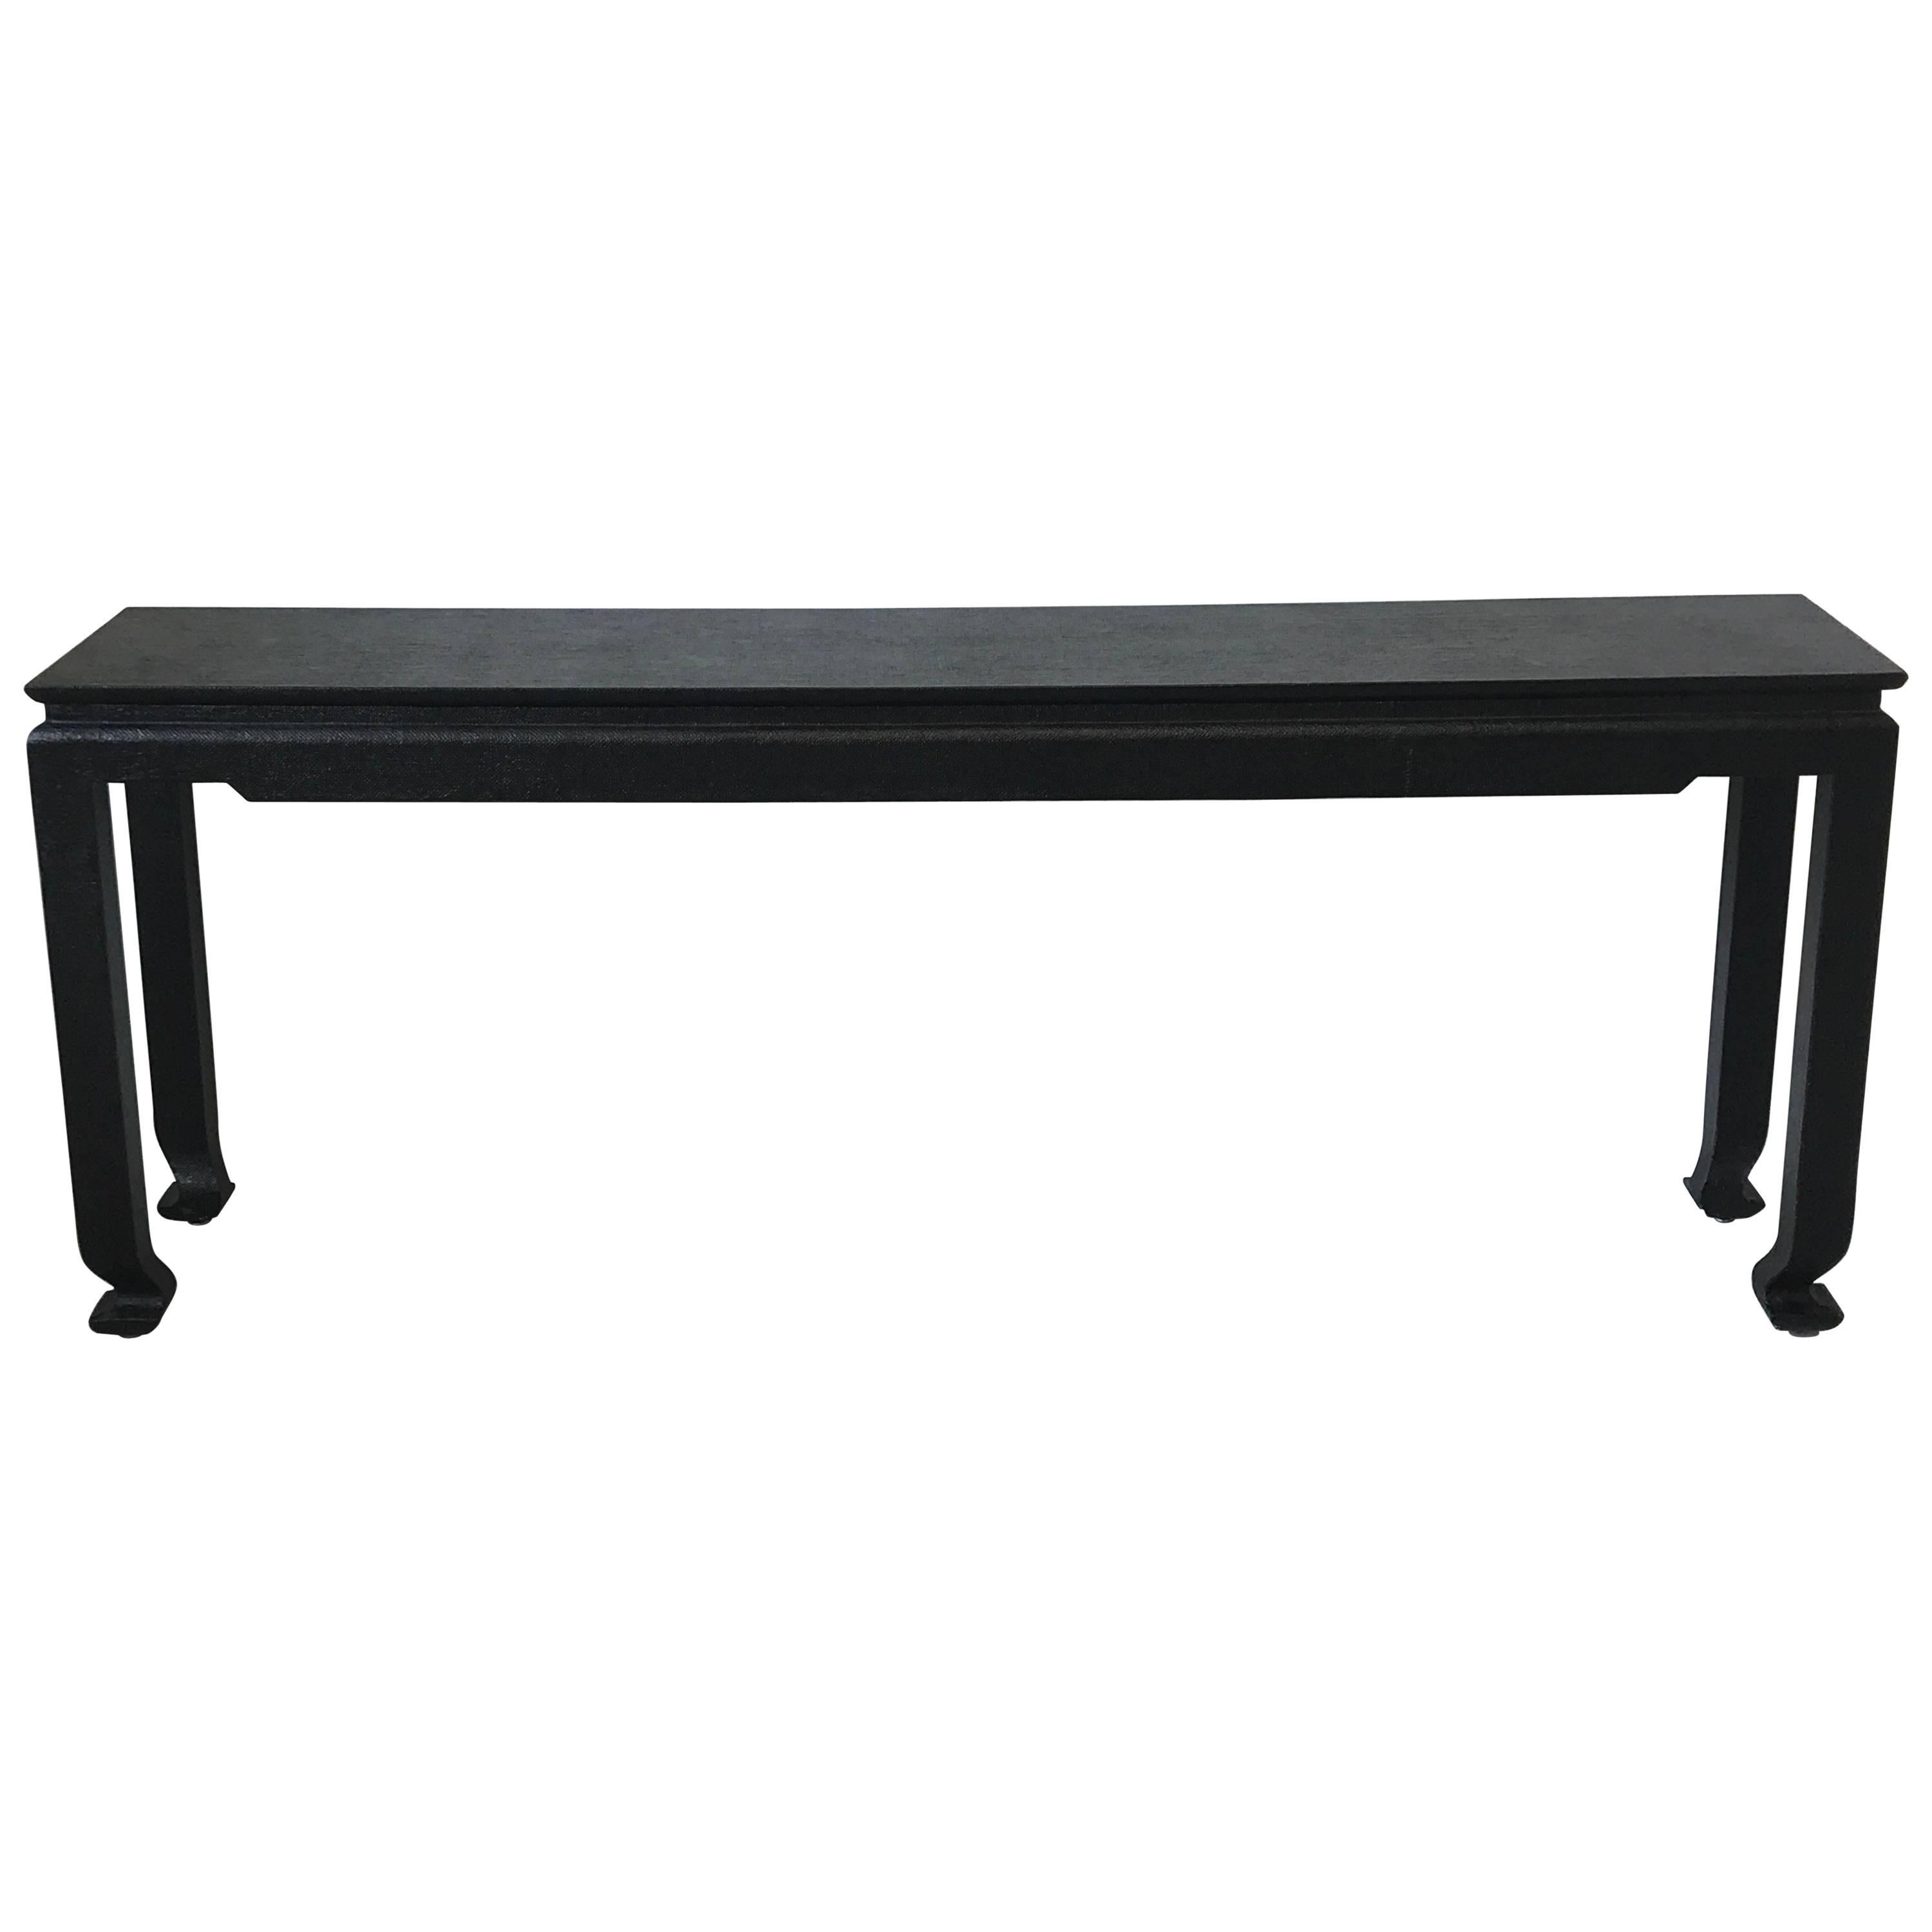 1970s Black Grasscloth Lacquered Ming Style Console Table